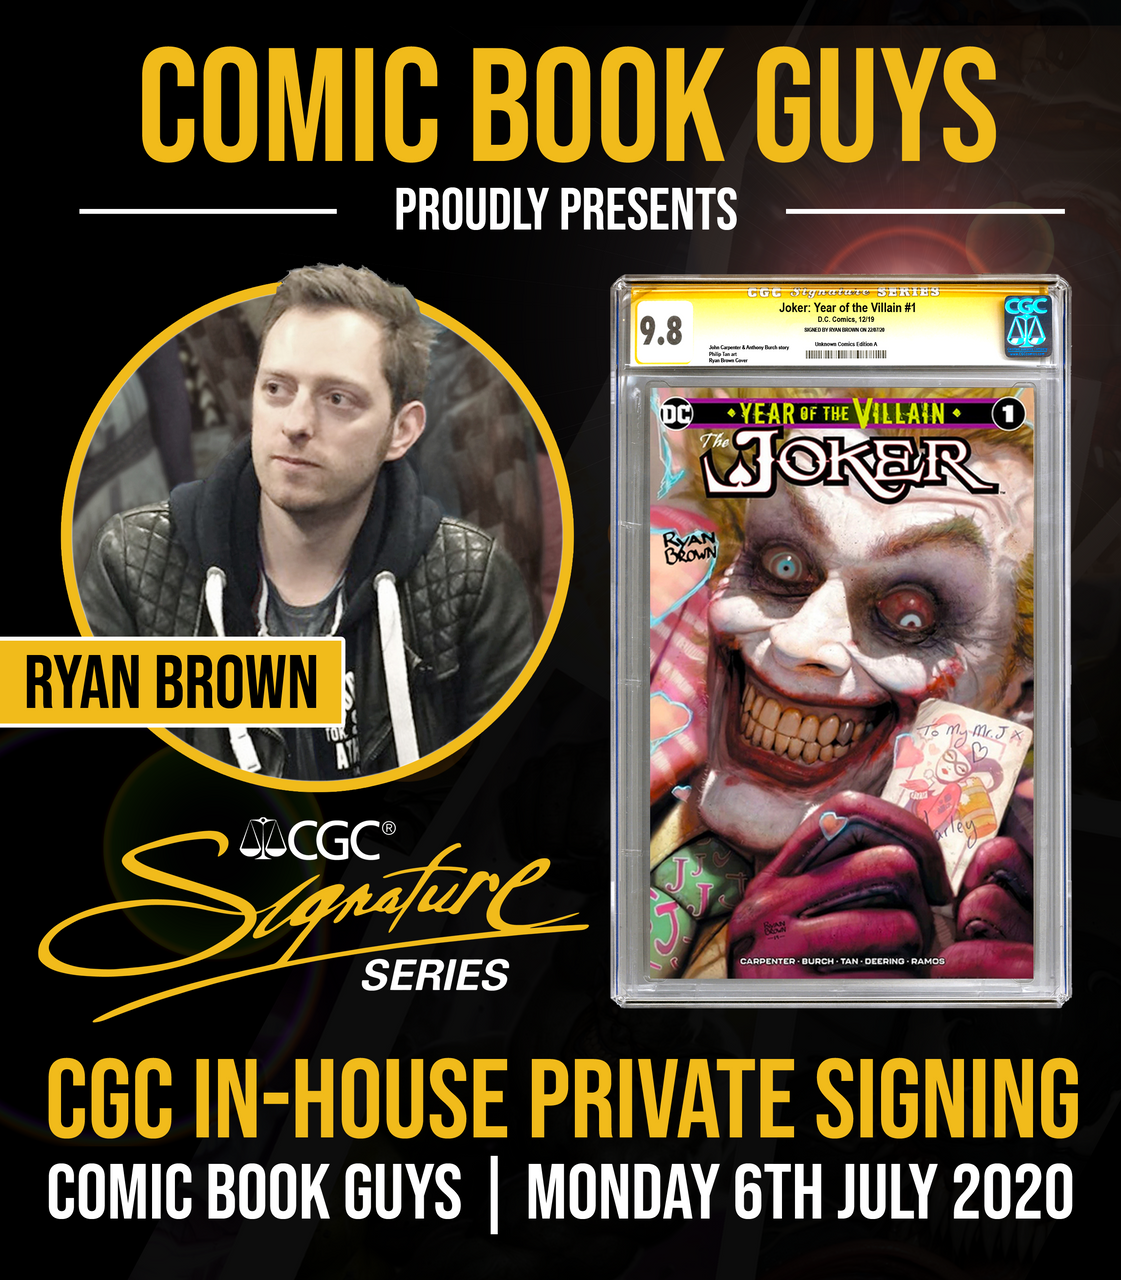 CGC Announces In-House Private Signing with Legendary Comic Writer